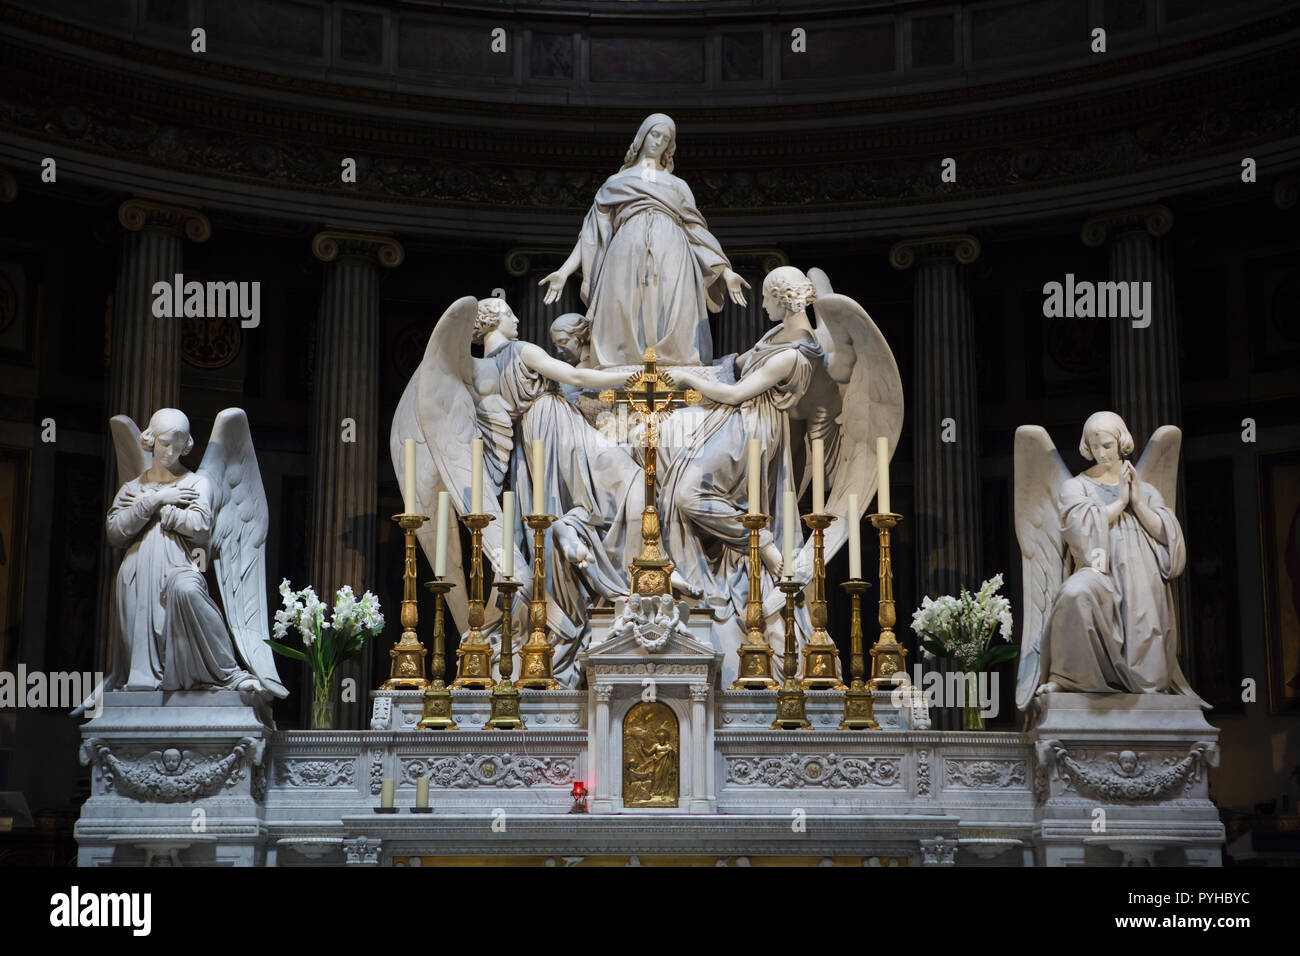 Assumption of Saint Mary Magdalene. Marble statue by French sculptor Carlo Marochetti on the high altar of the Madeleine Church (Église de la Madeleine) in Paris, France. Stock Photo